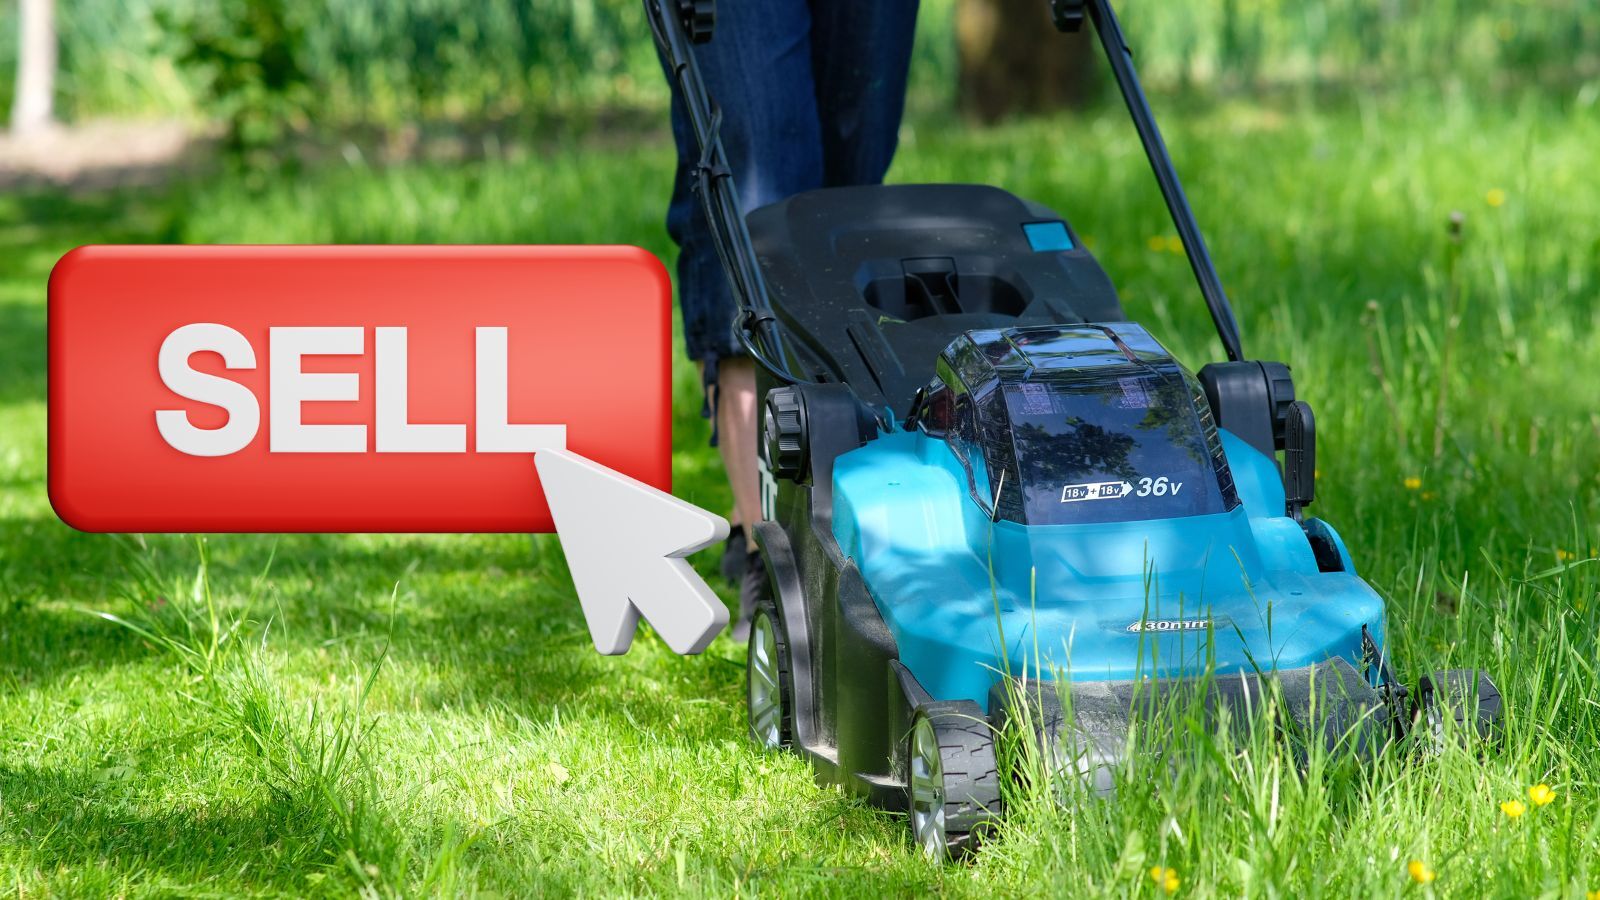 Where to Sell My Lawn Mower? (Increase Its Value Before Selling It)